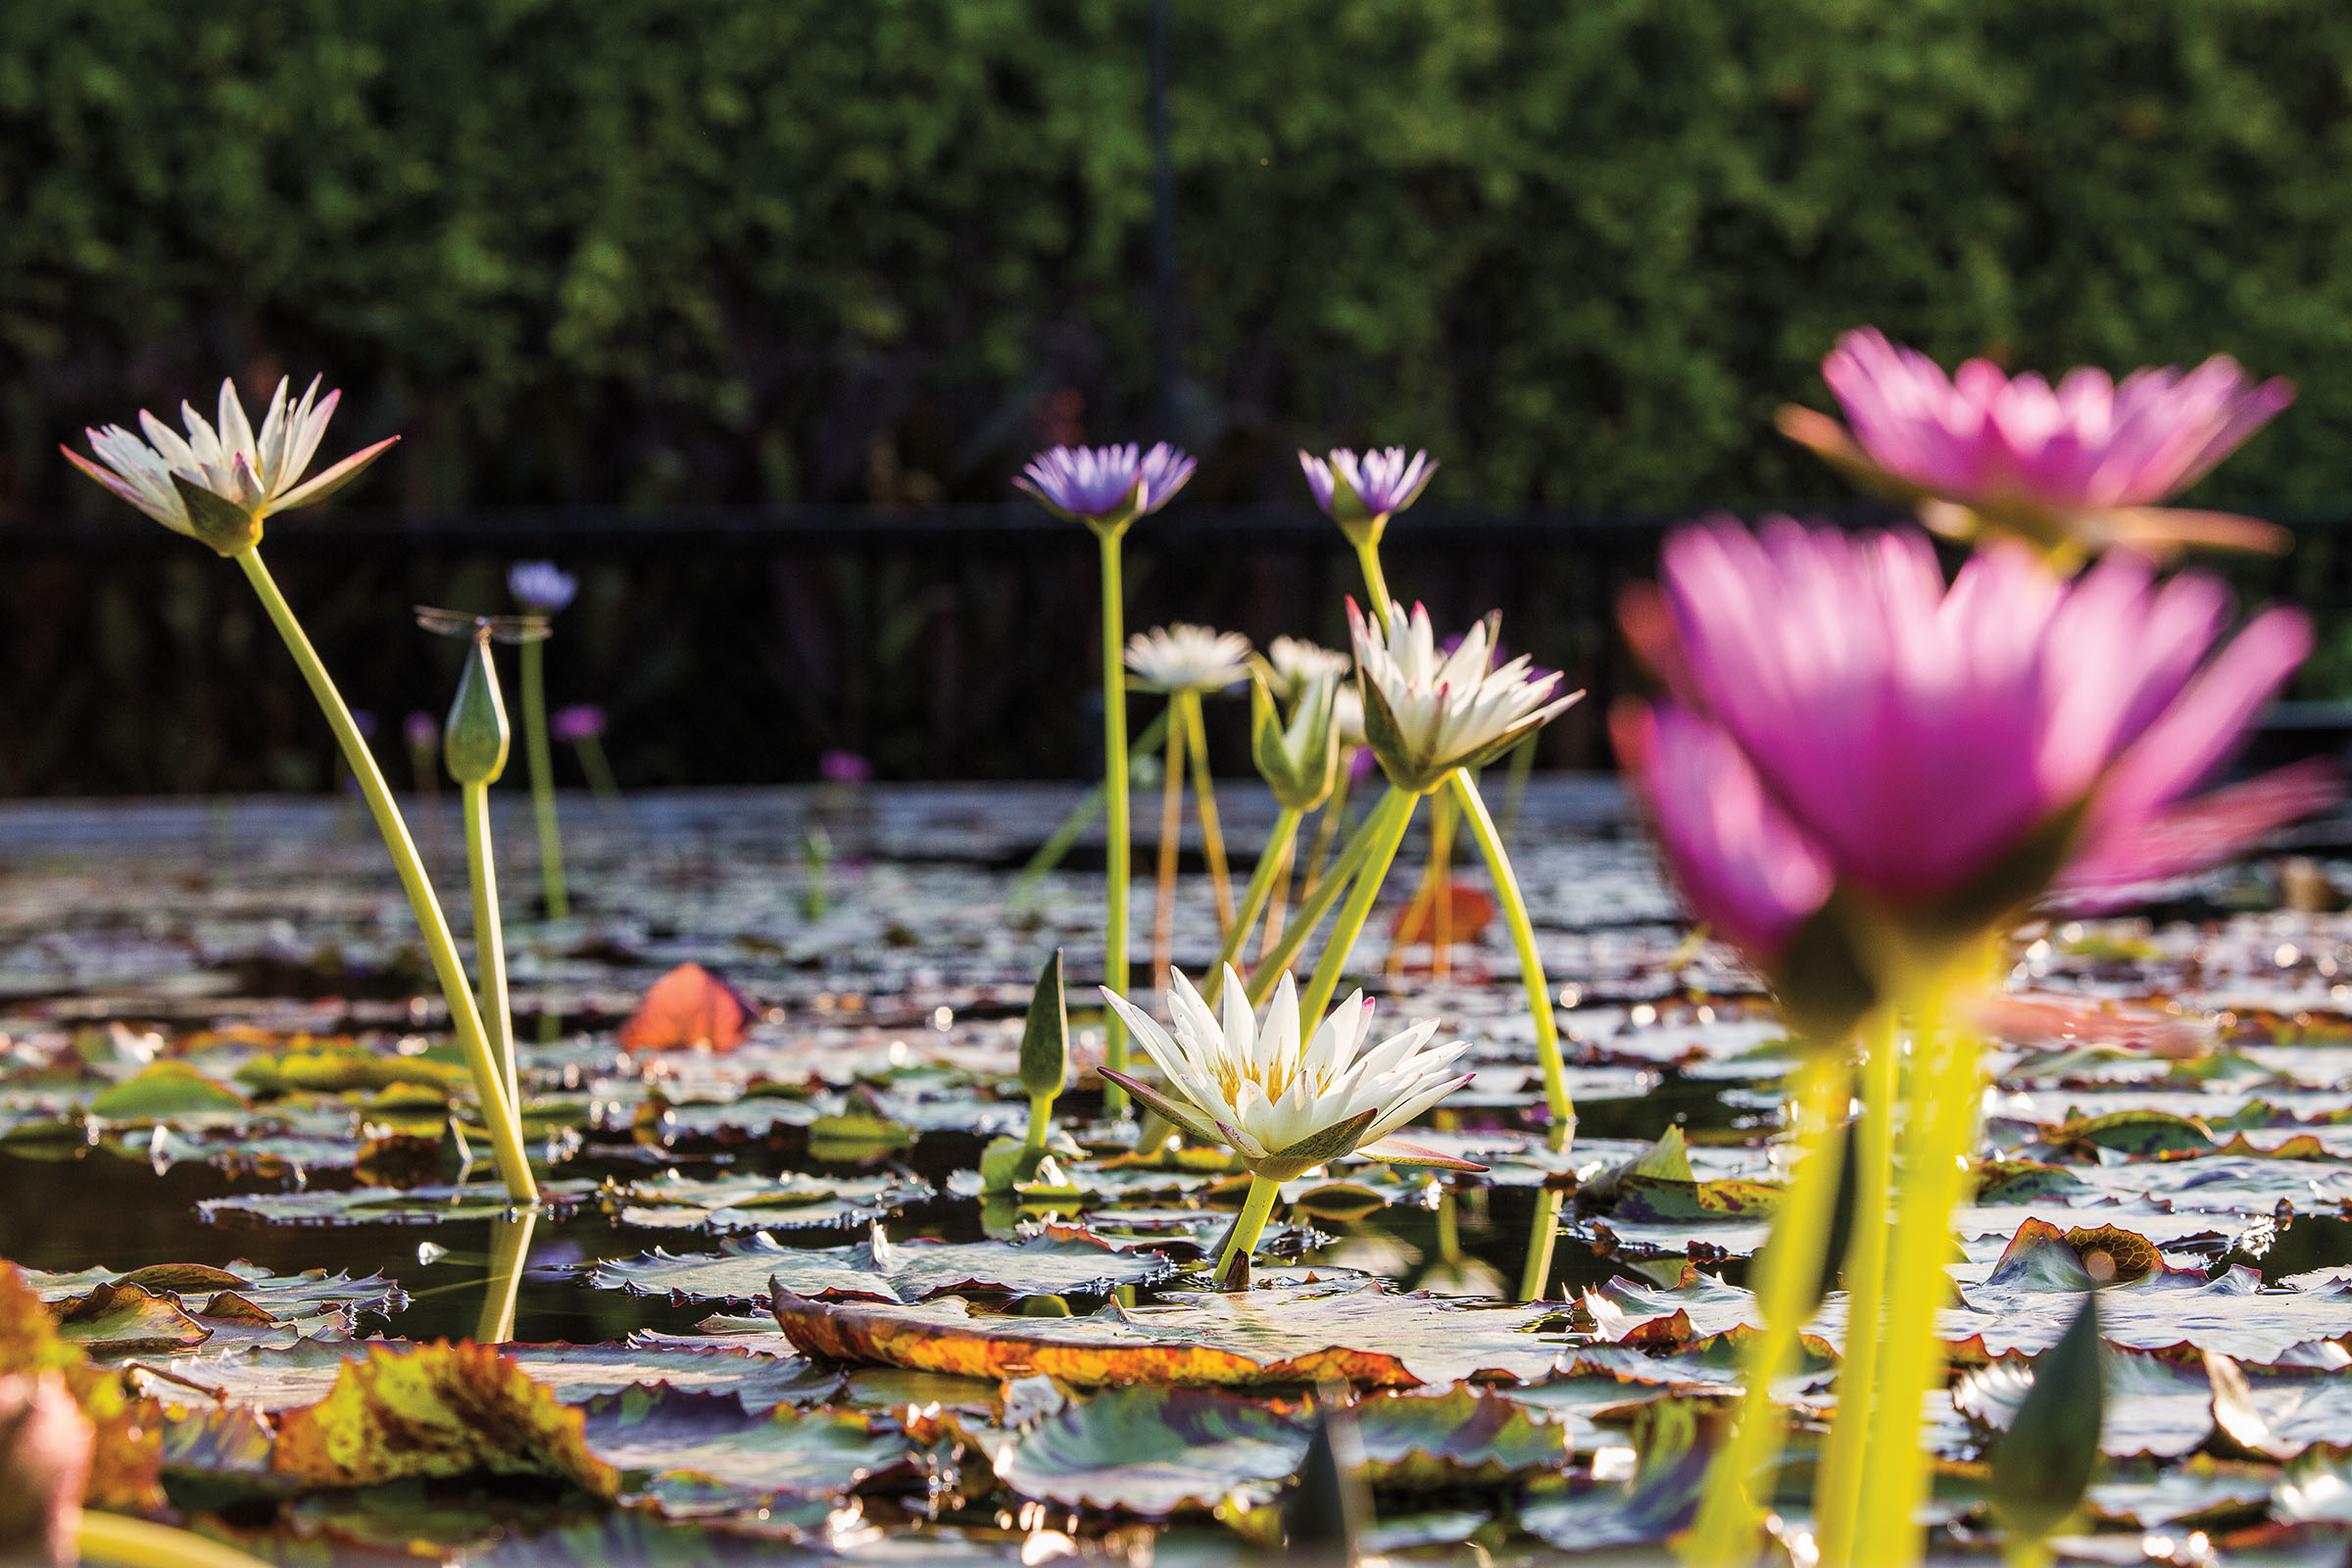 Pink and white flowers grow from green water lilies on a pond